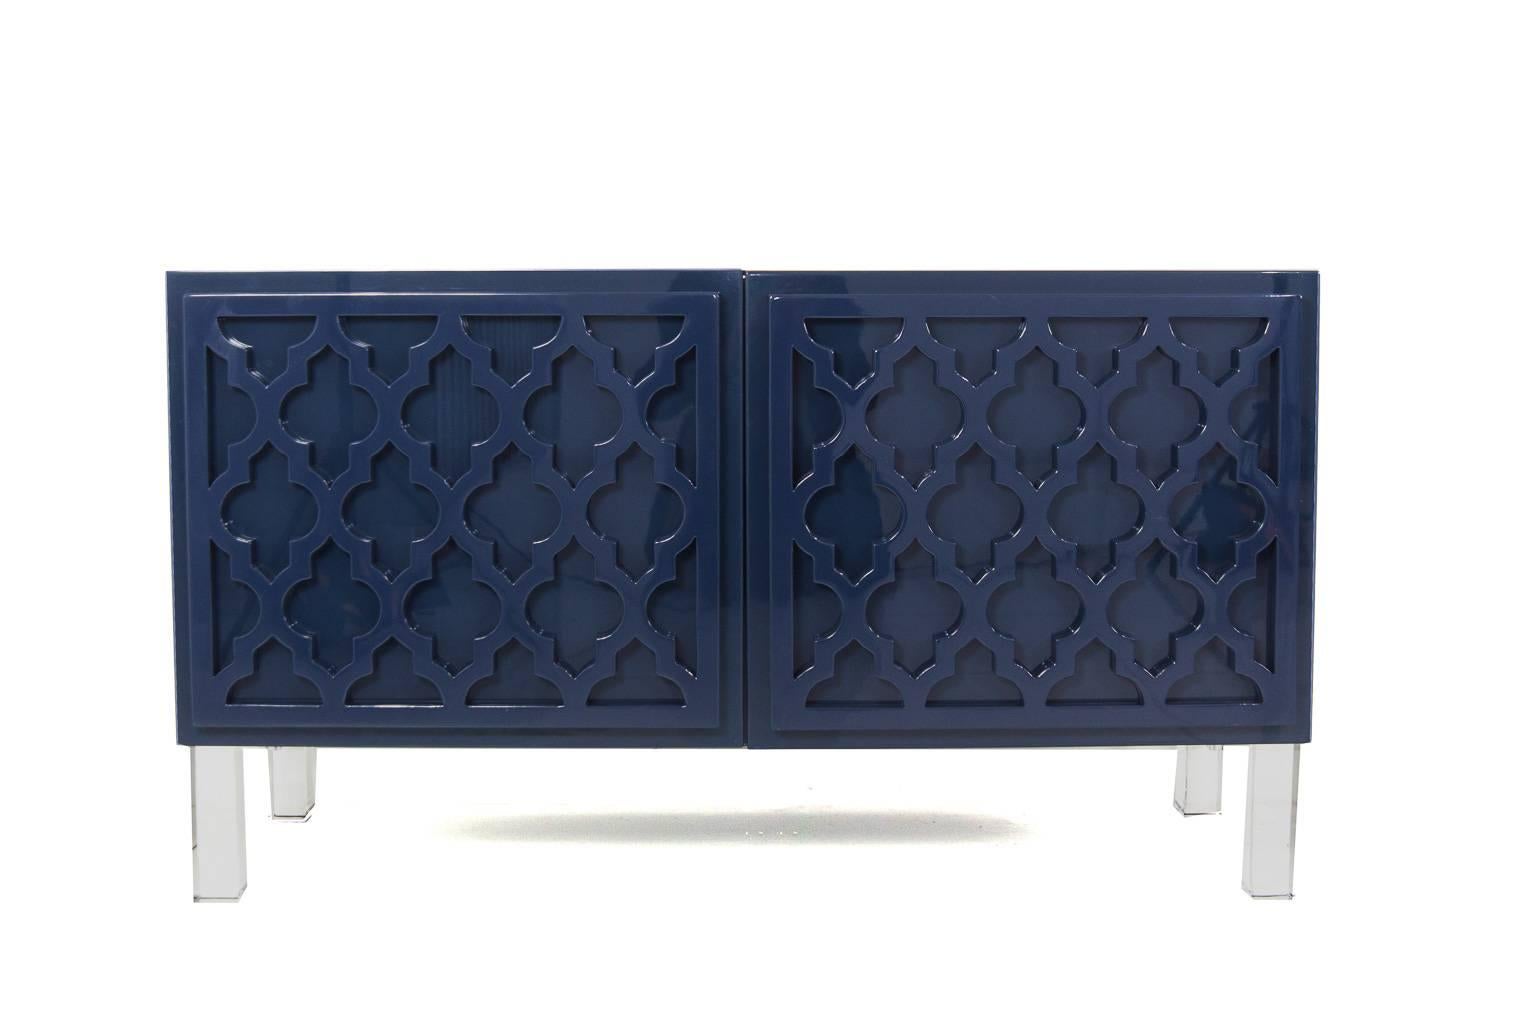 The Tangier 2 Door Credenza is simply stunning. In a grand color, suggestive of the majestic peacock's plumes, this item makes a significant statement. Raised trellis motifs across the entire face of the credenza add a sense of airy